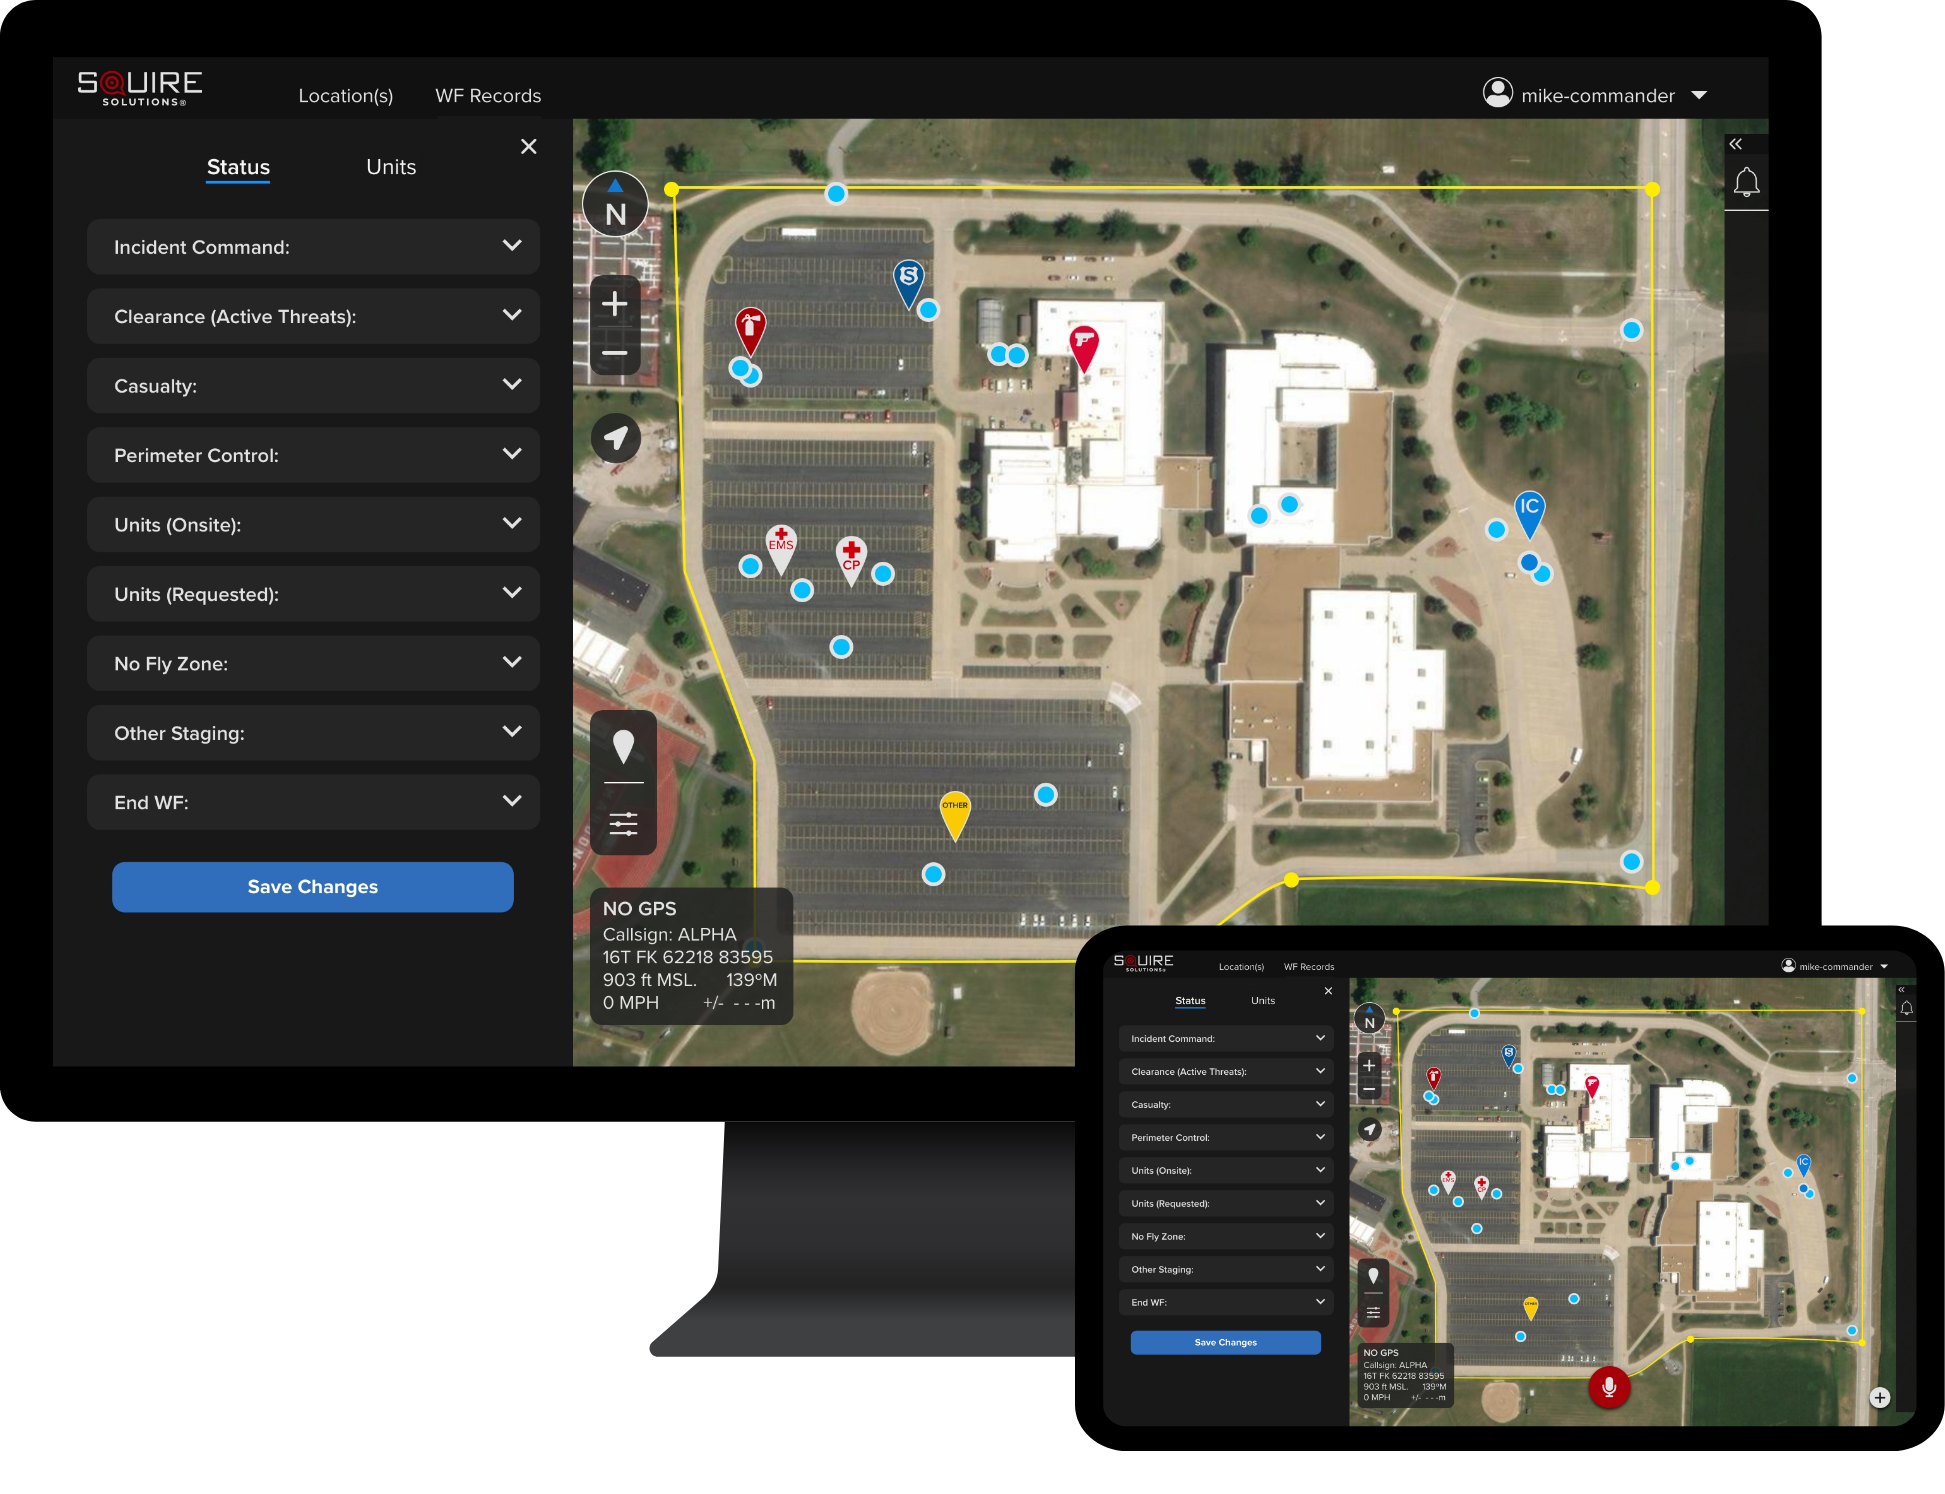 Squire Solutions software user interface shown on desktop and mobile devices